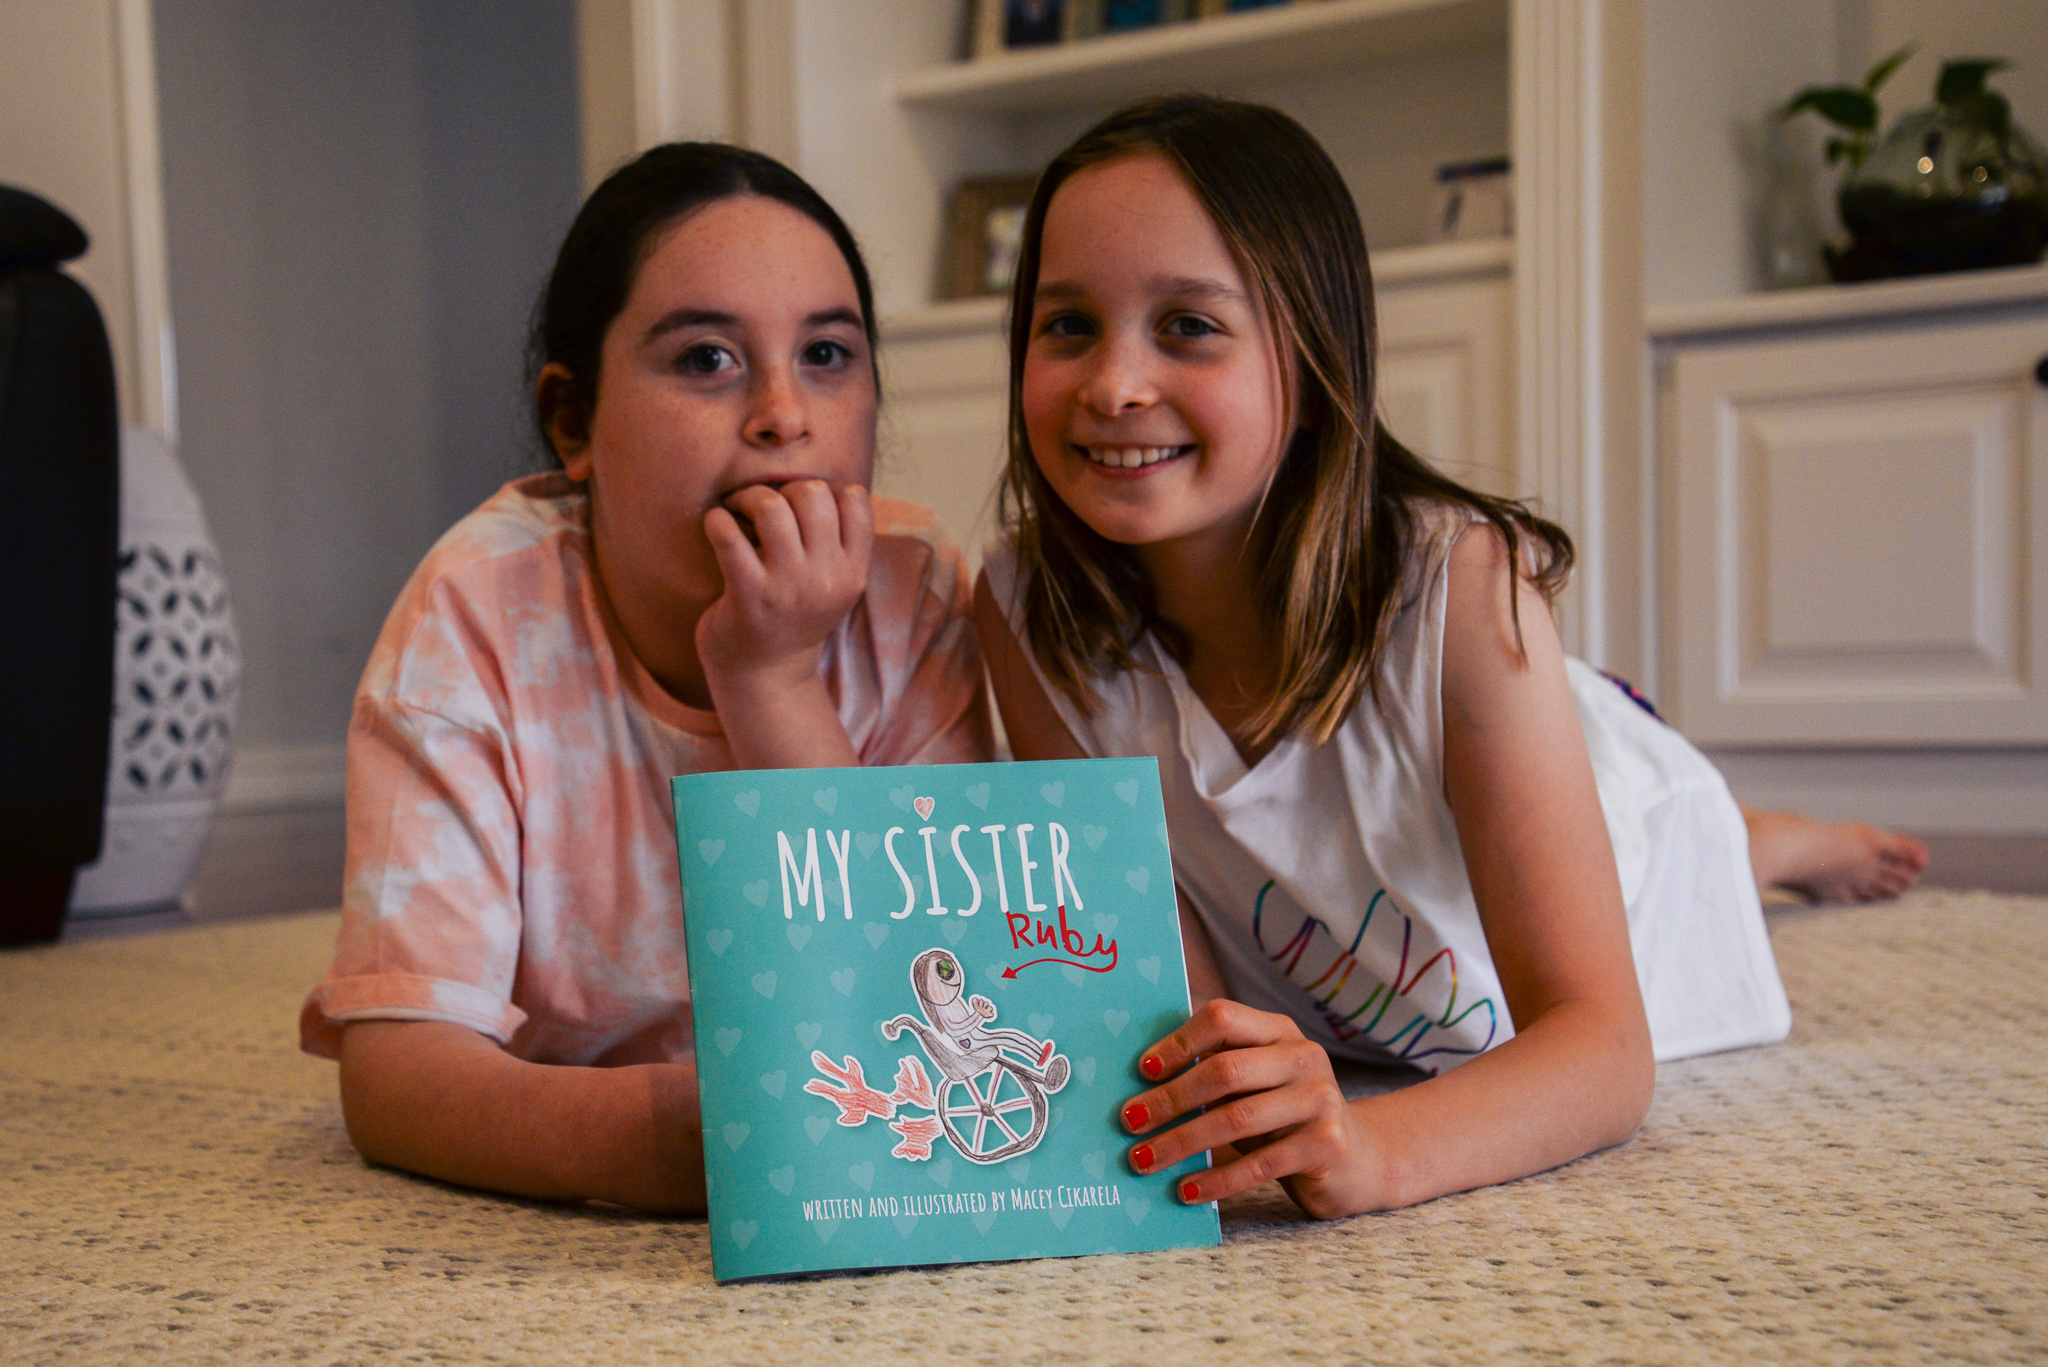 ruby and Macey are laying on the floor holding Macey's children's book called 'My Sister'